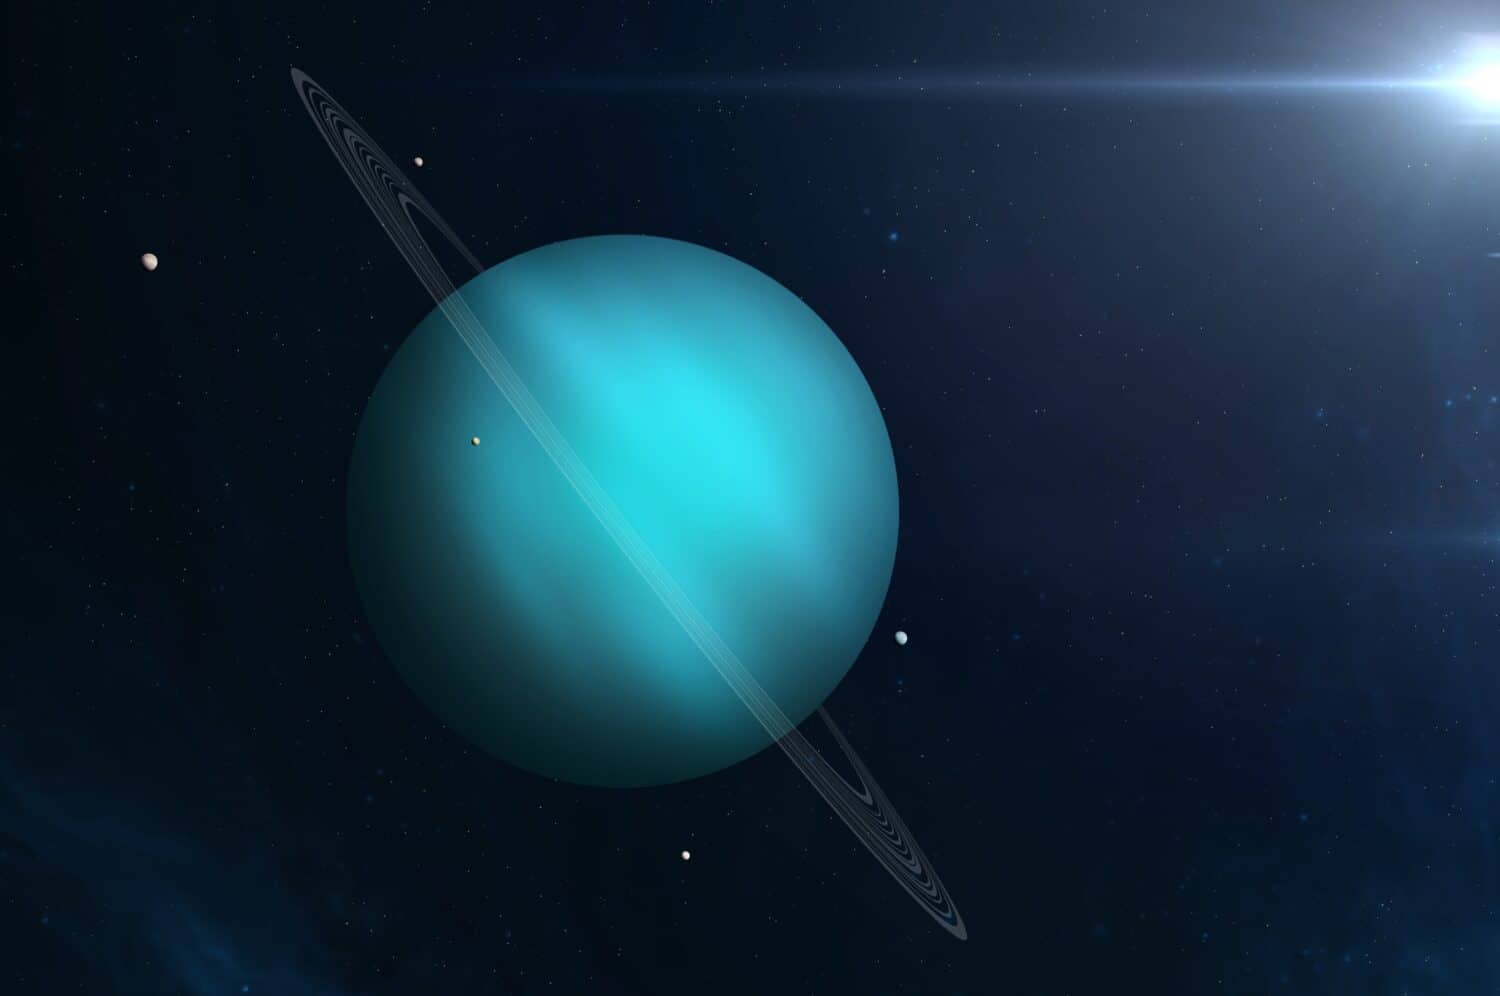 View of planet Uranus from space.   Uranus - ice giant planet, thirteen rings and the five main satellites are Miranda, Ariel, Umbriel, Titania, and Oberon. This image elements furnished by NASA.